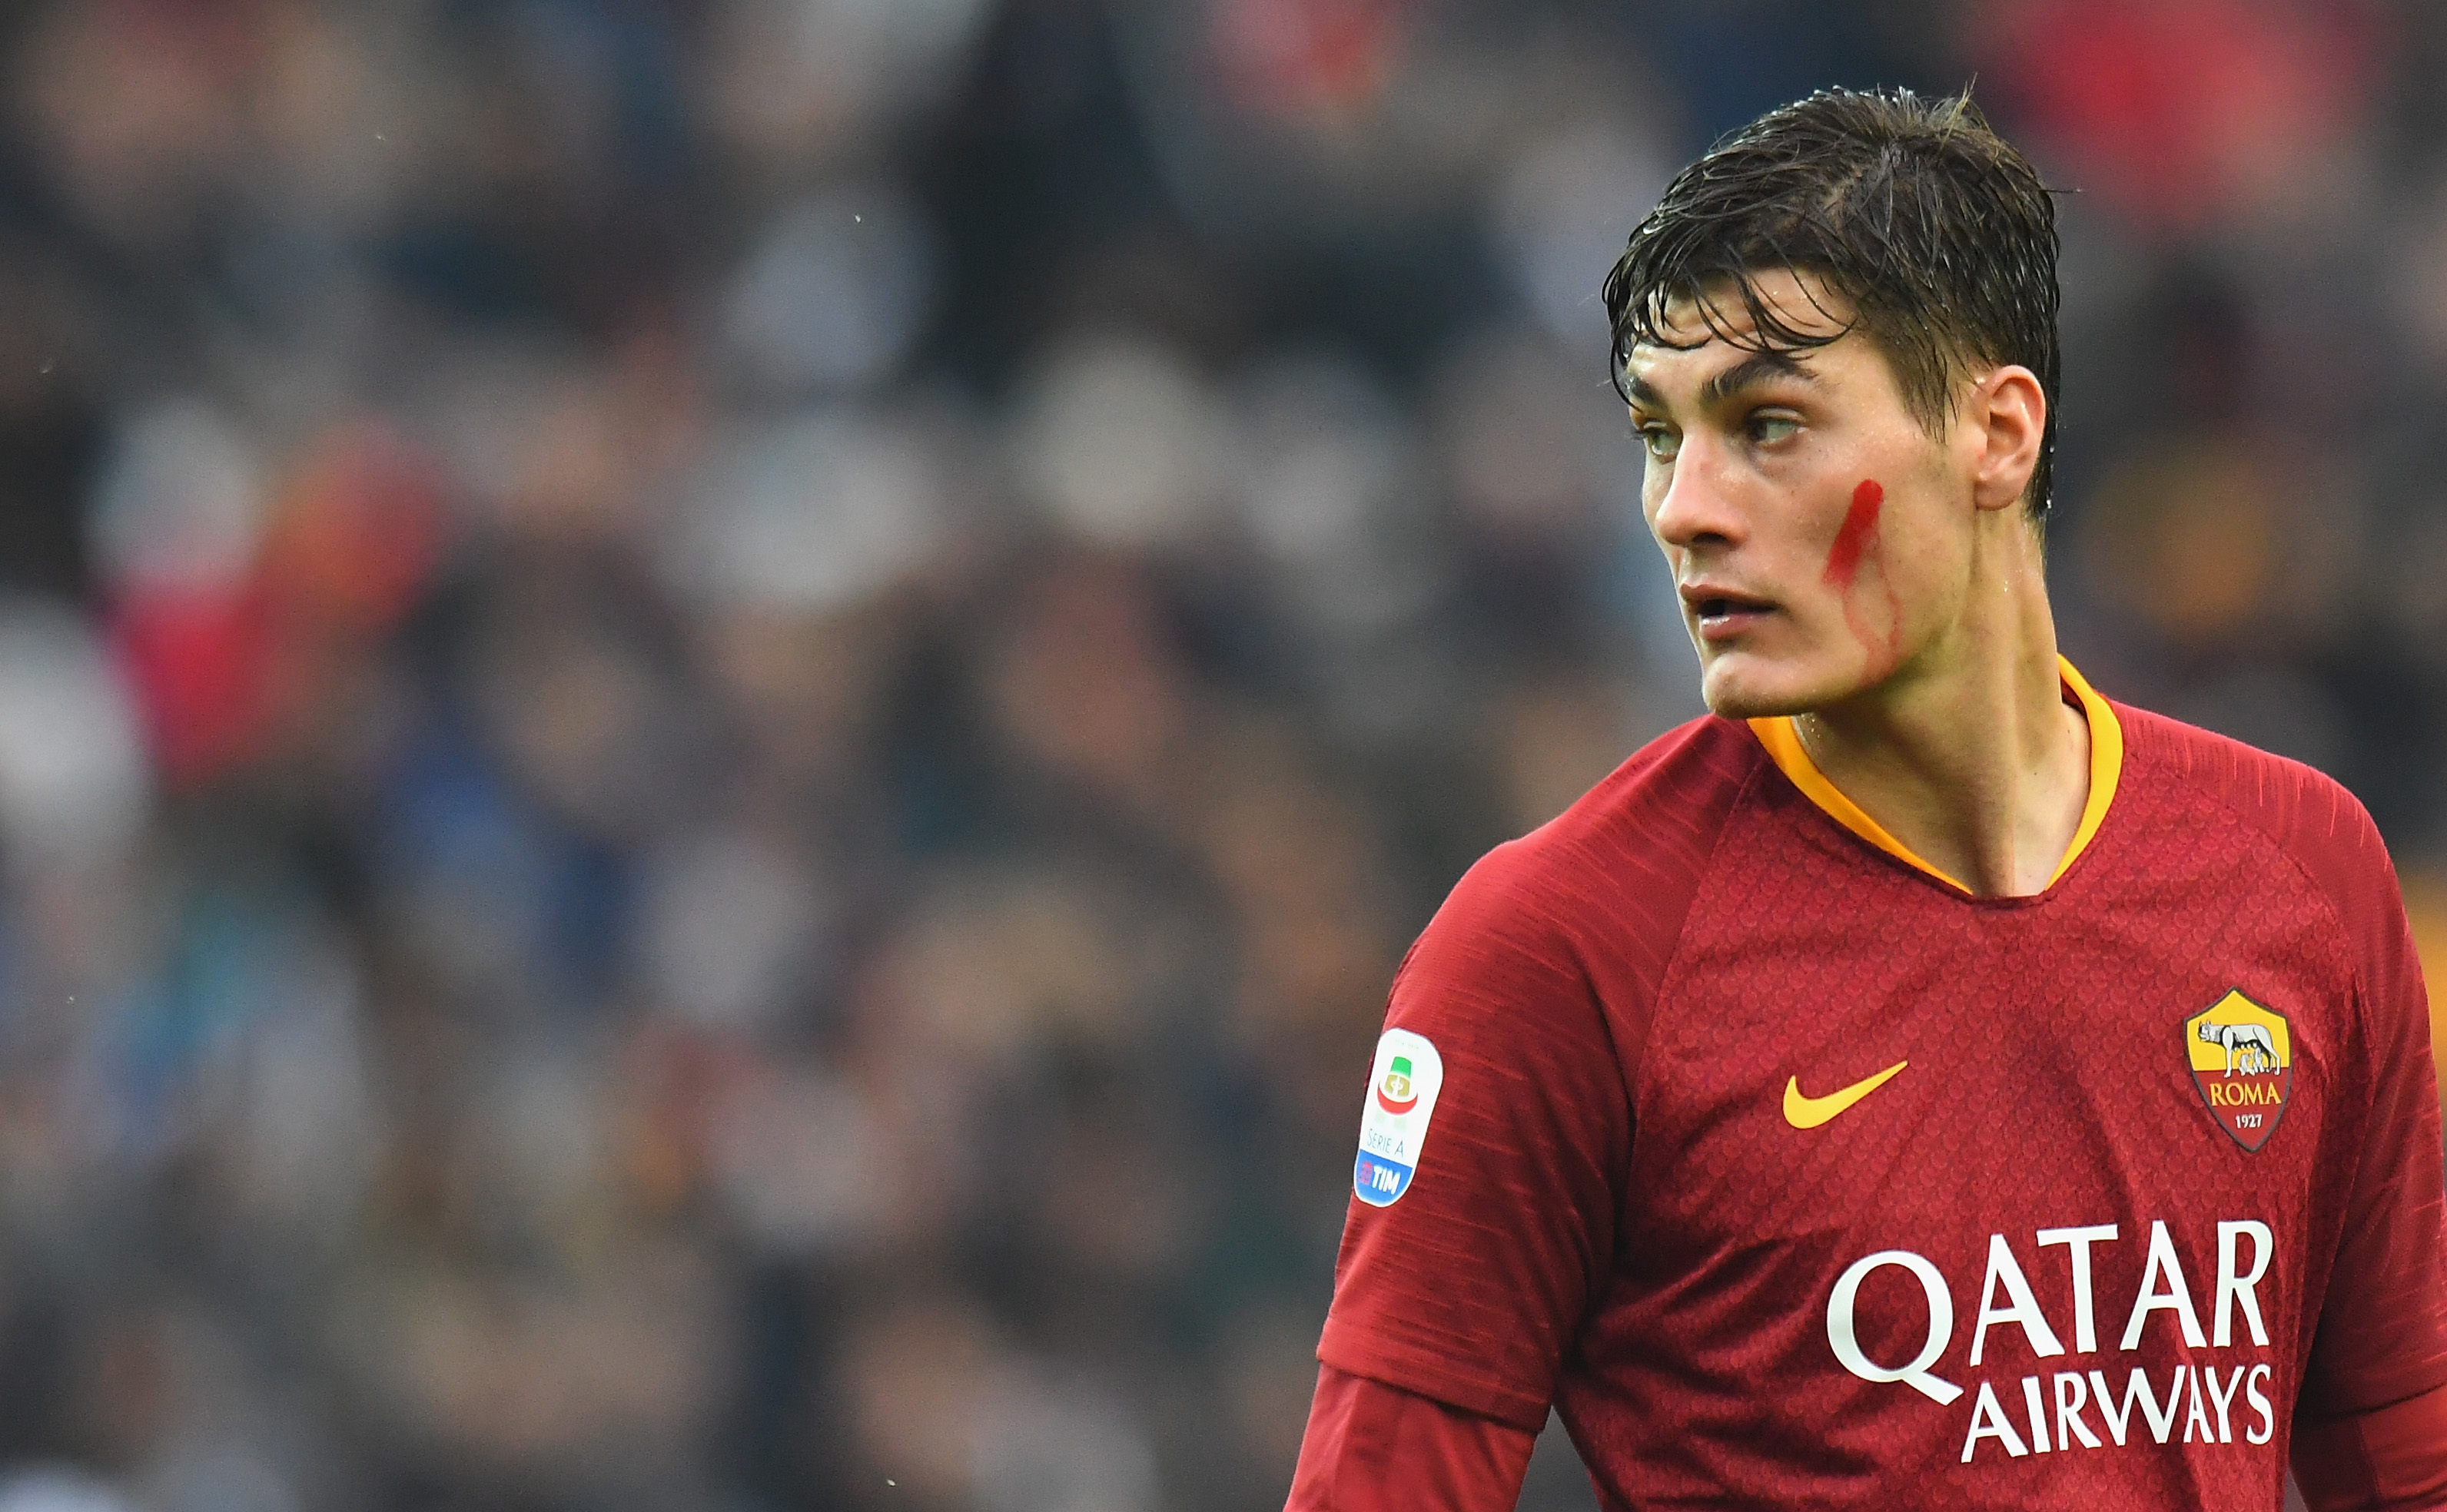 UDINE, ITALY - NOVEMBER 24:  Patrik Schick of AS Roma looks on during the Serie A match between Udinese and AS Roma at Stadio Friuli on November 24, 2018 in Udine, Italy.  (Photo by Alessandro Sabattini/Getty Images)